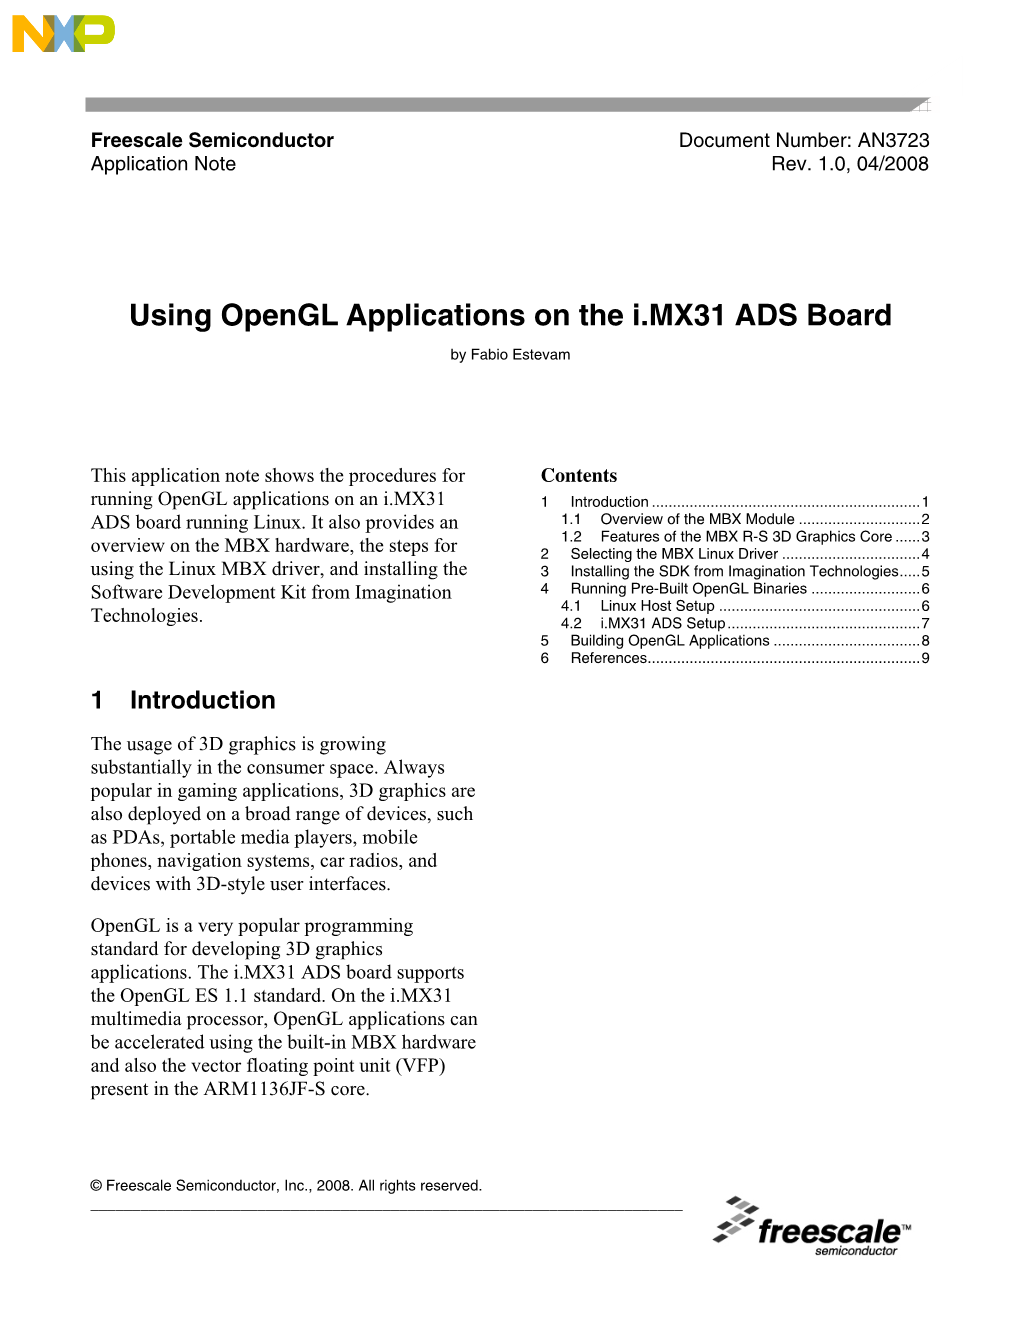 Using Opengl Applications on the I.MX31 ADS Board by Fabio Estevam